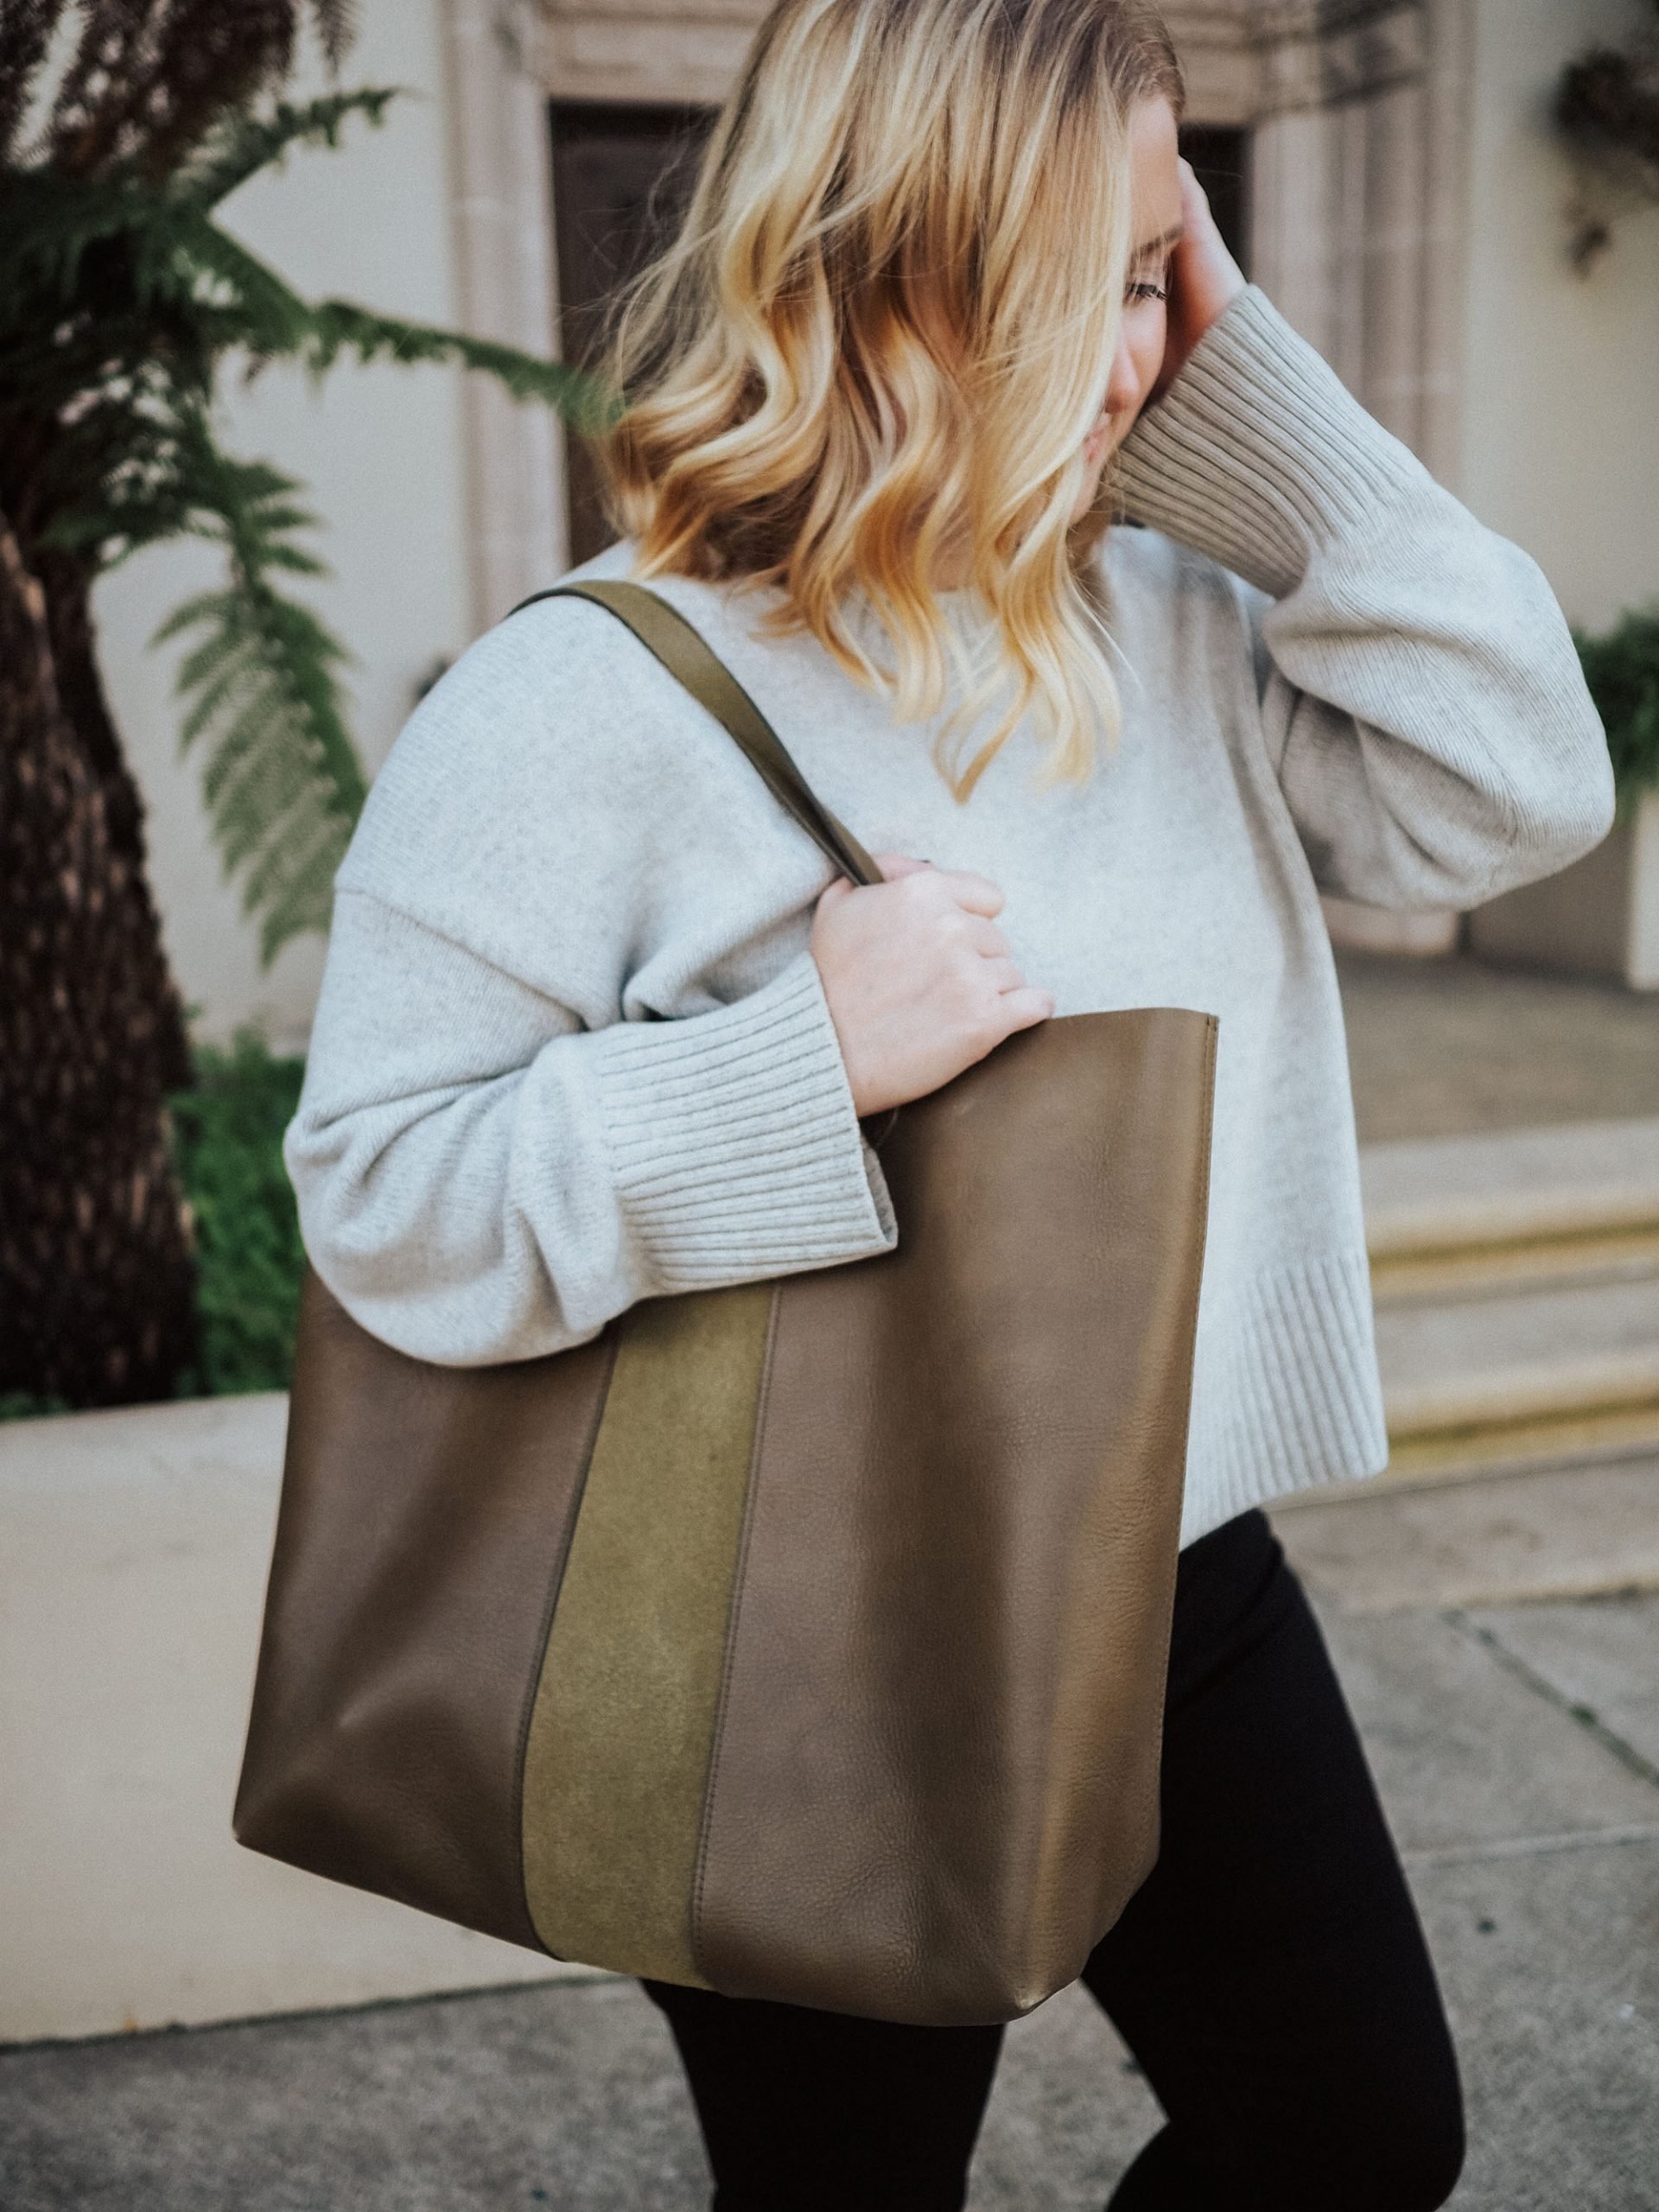 Curious which tote is better, the Cuyana, Everlane, or Madewell totes? This post is for you! Check out this full tote comparison blog post.